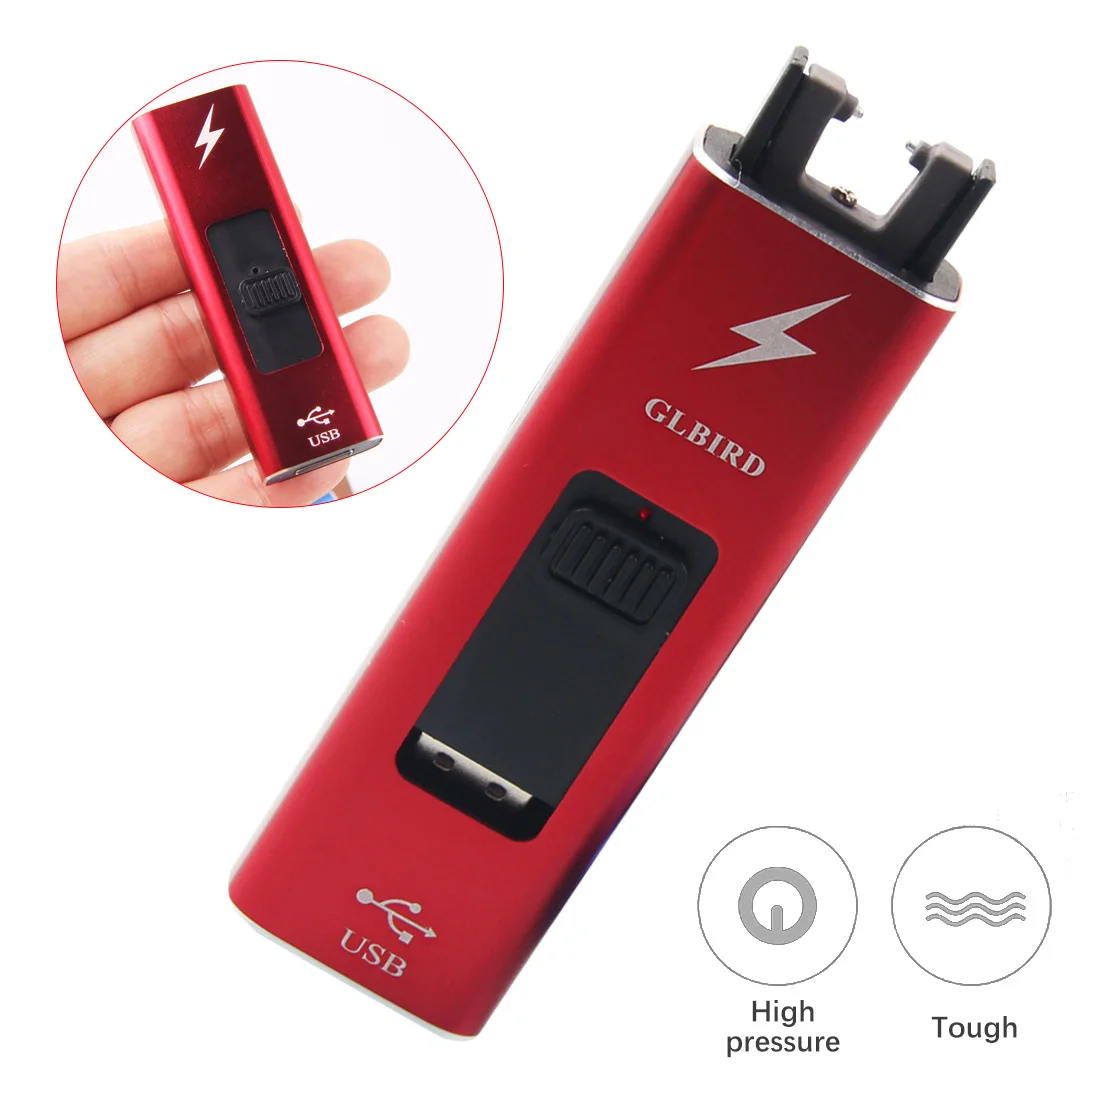 

Usb Charge Lighter on Push Pulse Electric Arc Originality Gift Lighter Windproof Plasma Lighters Gadgets for Men Smoke Accesoire